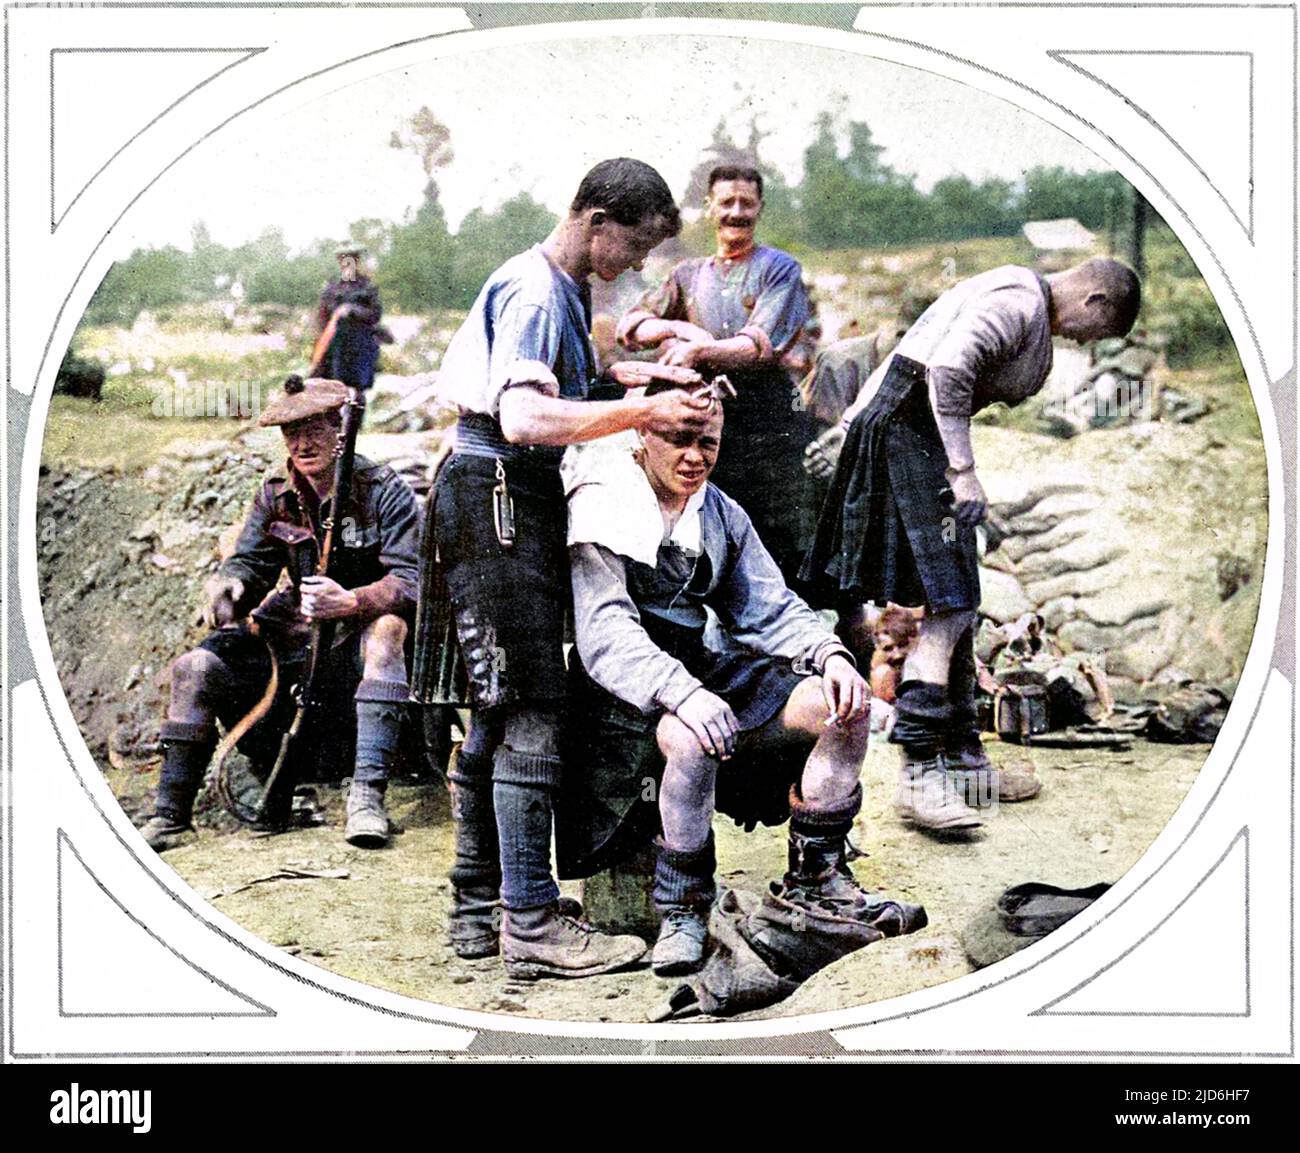 A Scottish army barber is shown cutting another soldier's hair. Colourised version of: 10219644       Date: Aug-16 Stock Photo